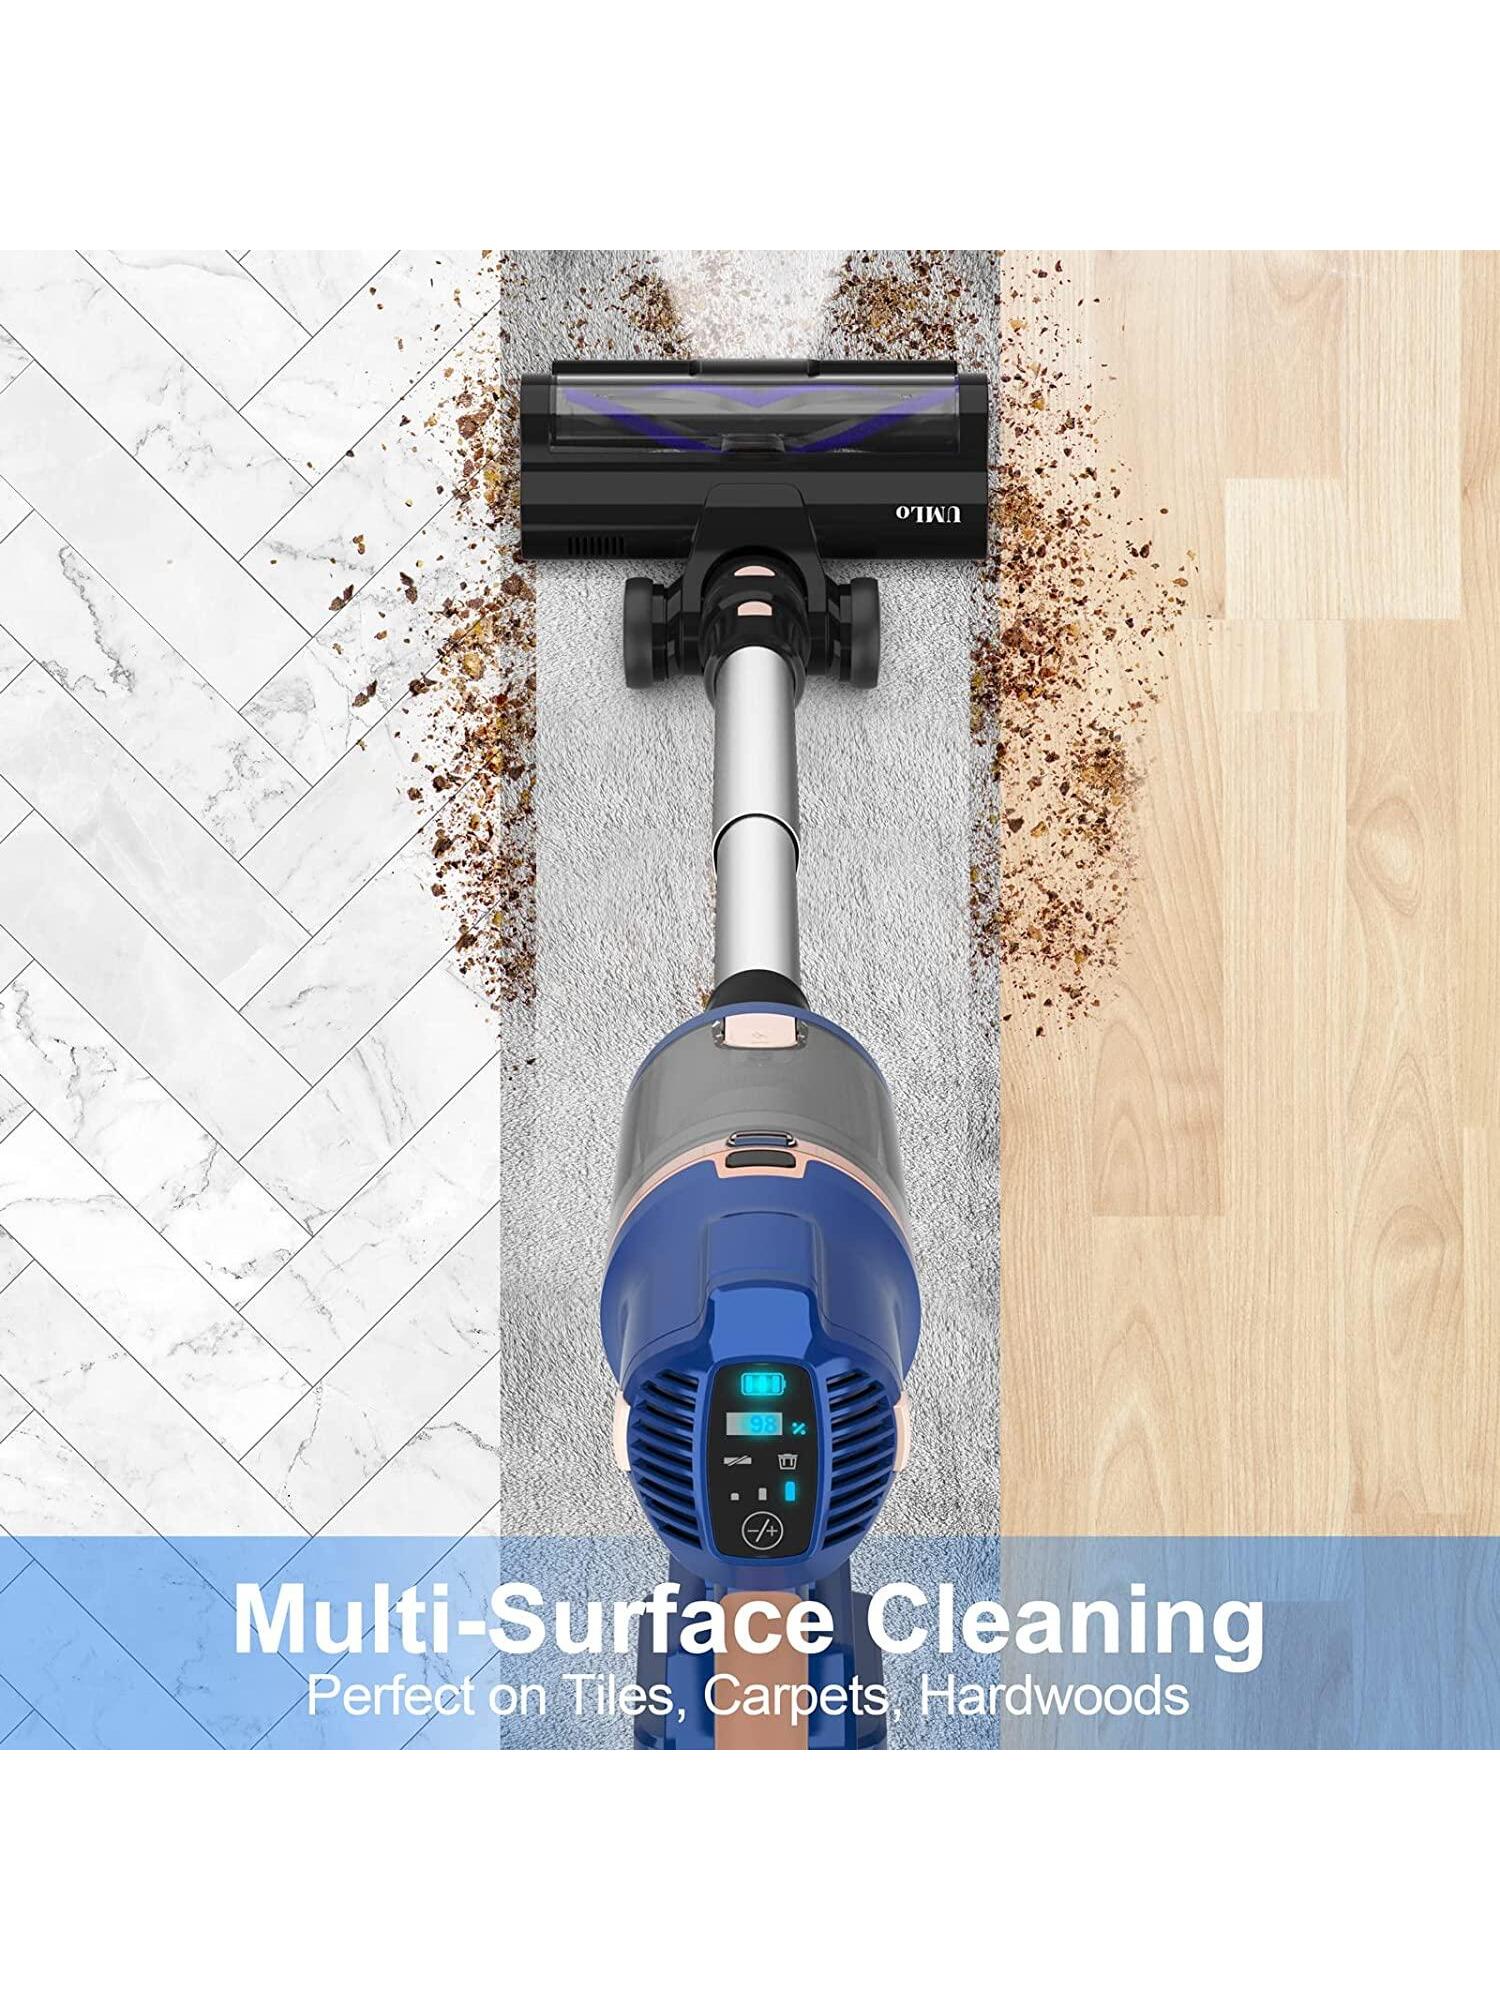 UMLo Cordless Vacuum Cleaner, 300W 28Kpa Cordless Stick Vacuum with LED Display, Up to 60mins Runtime, 4000mAh Battery Cordless Vacuum, 6 in 1 Lightweight Vacuum for Pet Hair Carpet Hard Floor